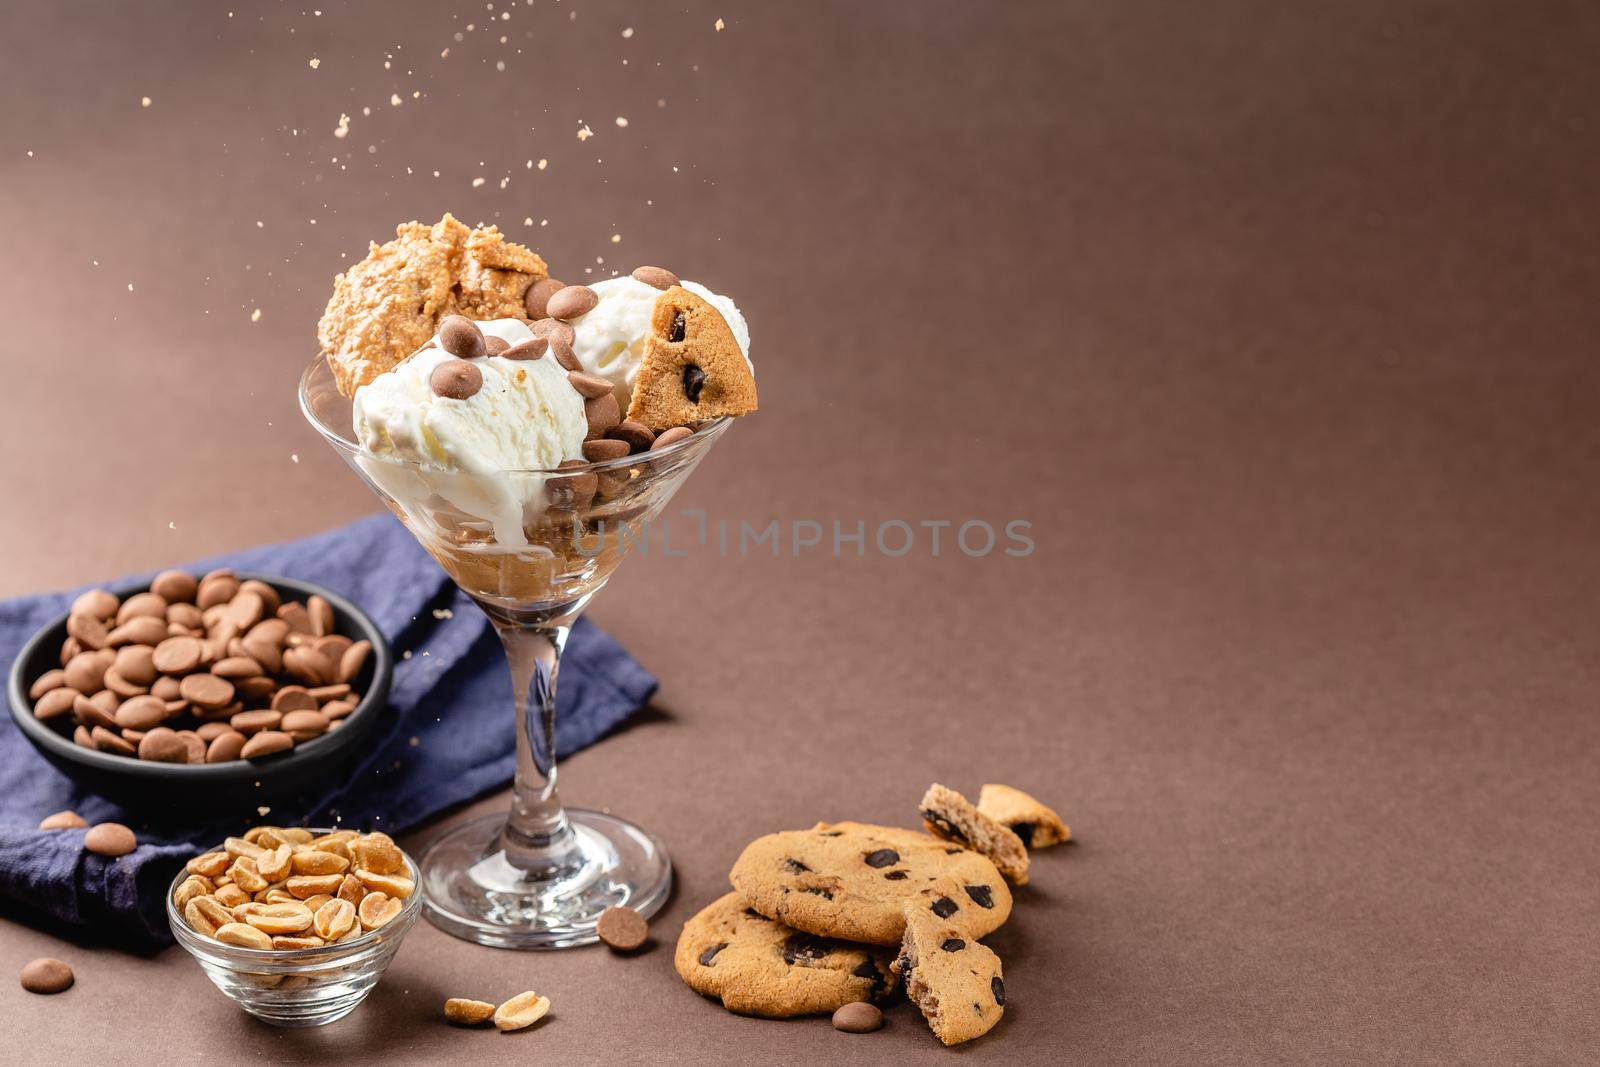 Homemade peanut butter ice cream with peanuts and chocolate cookies